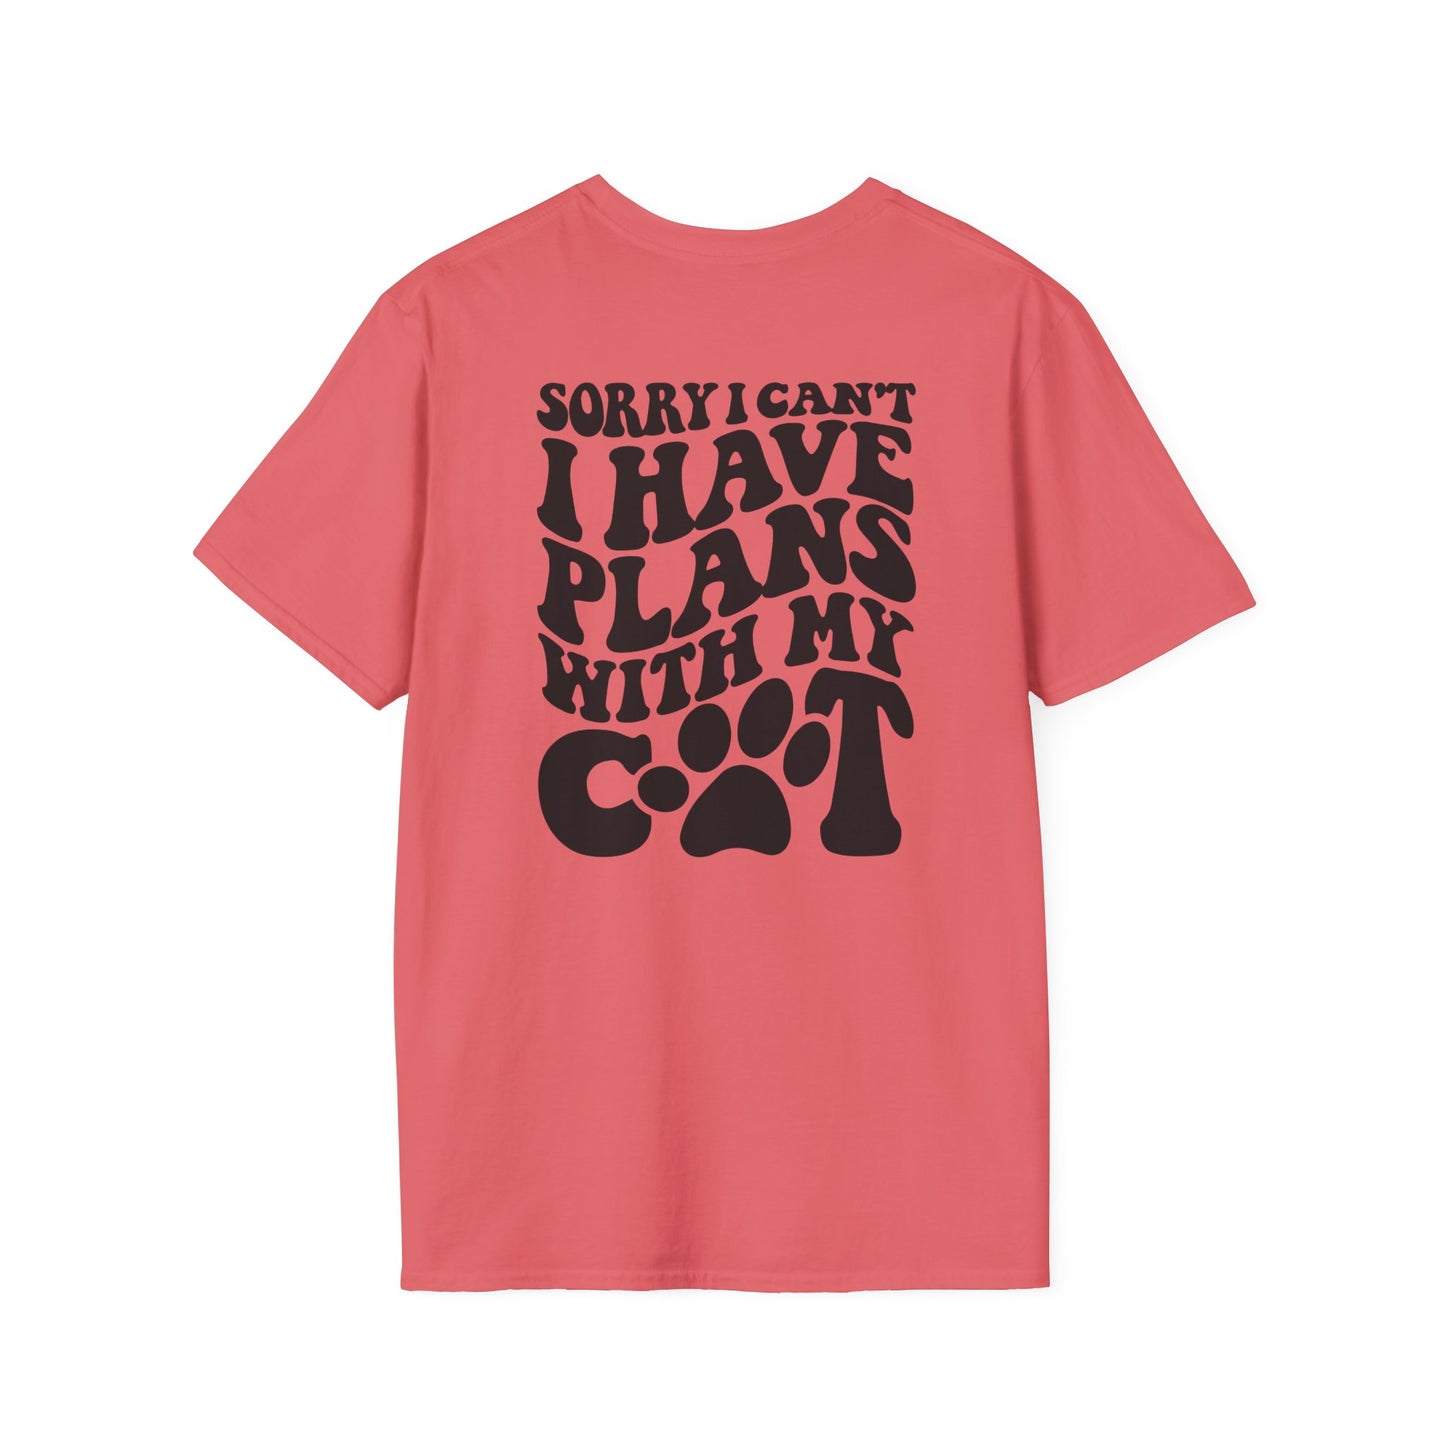 I have plans with my Cat - Unisex Softstyle T-Shirt